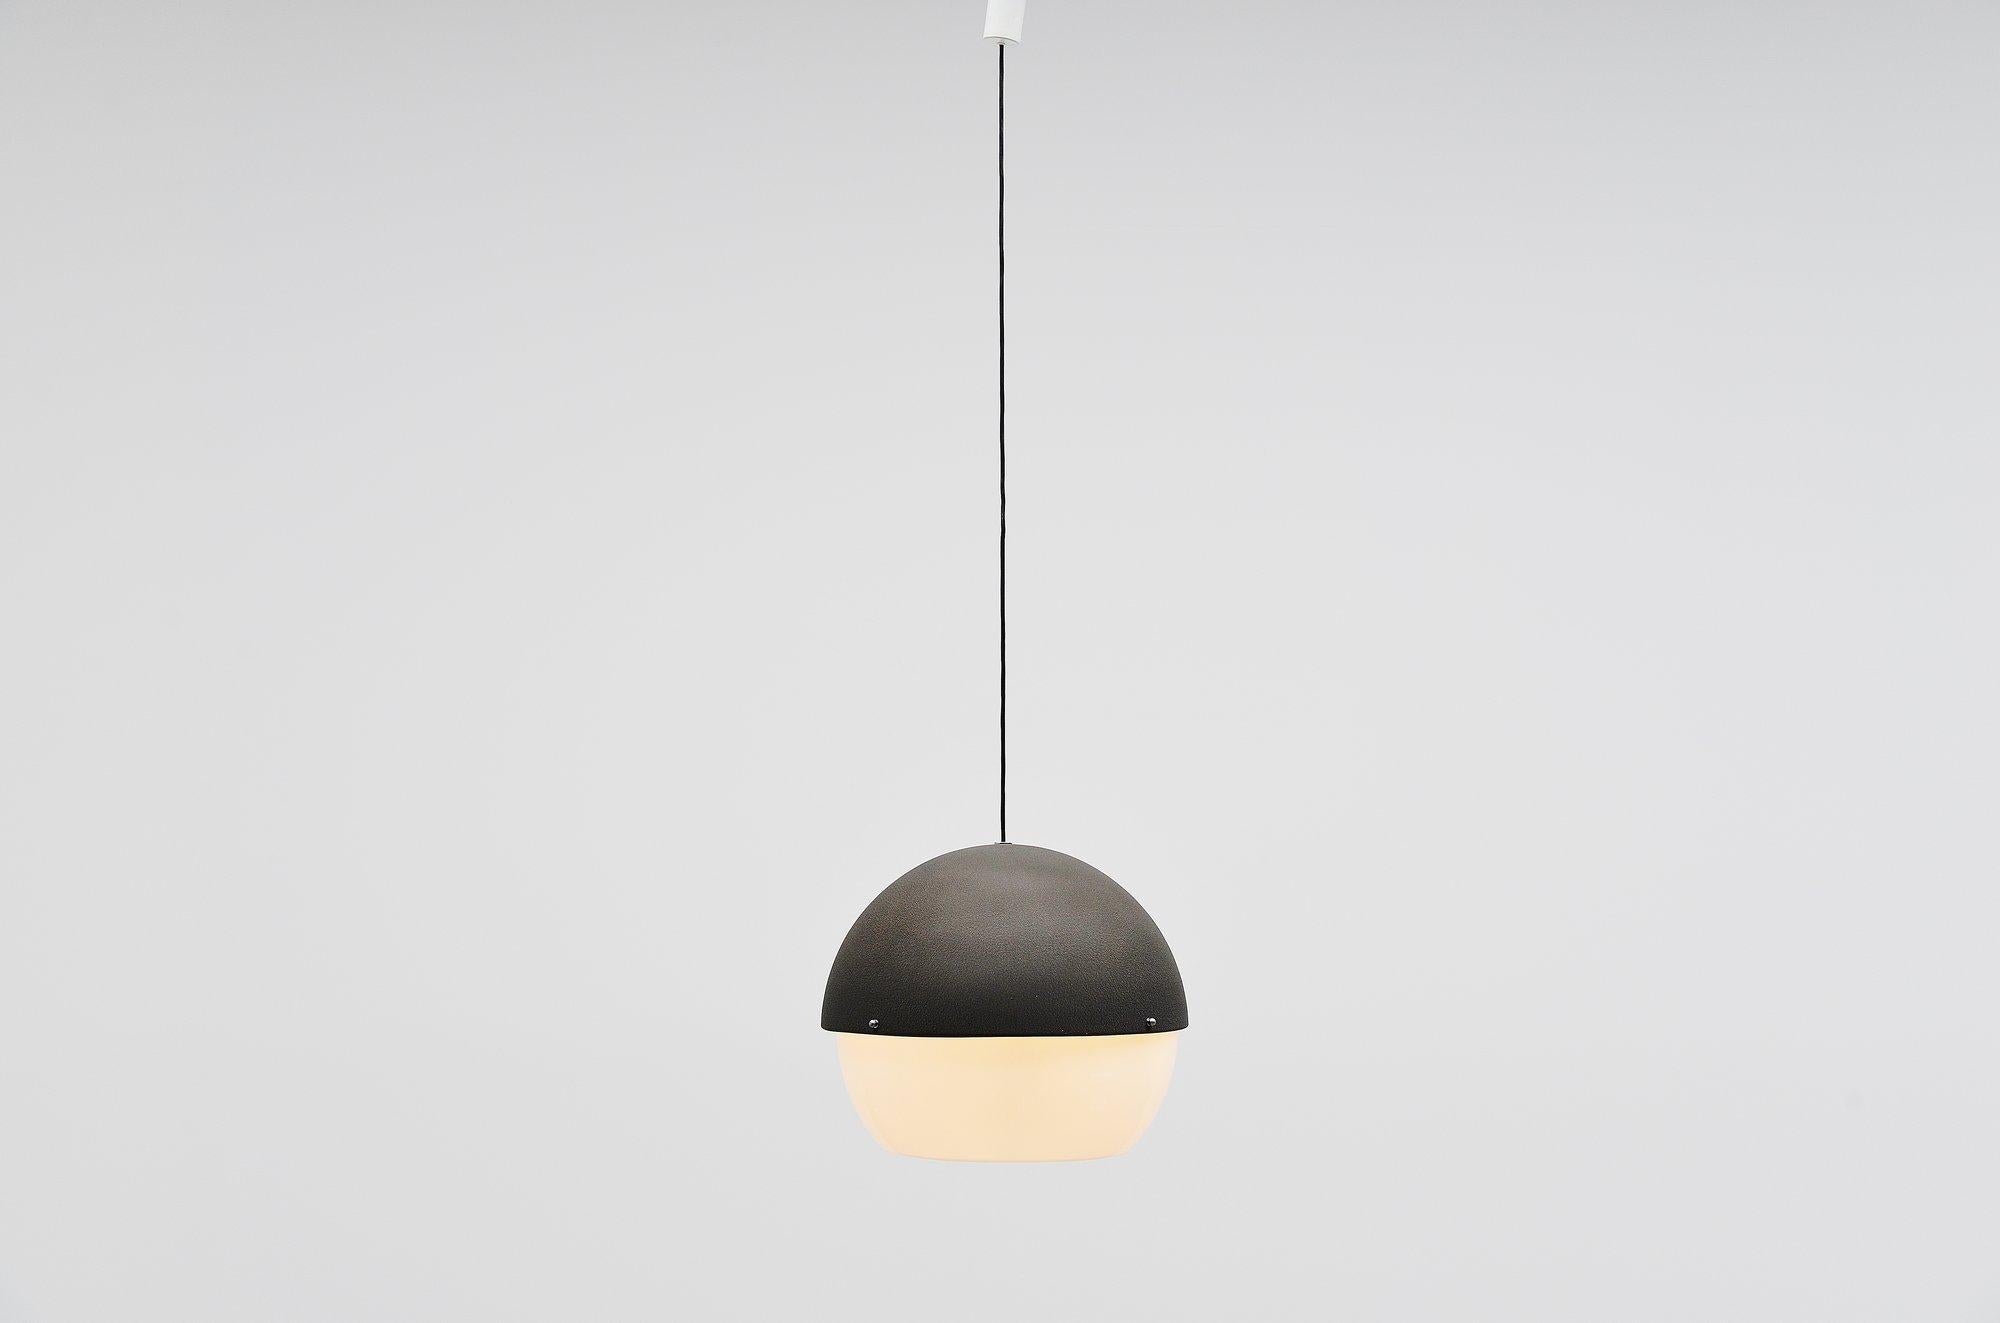 Fantastic large pendant lamp model 2048/px designed by Sergio Asti and manufactured by Arteluce, Italy 1959. This large shaped pendant lamp has an aluminium shade dark grey wrinkle painted which was typical for Arteluce lamps. The diffuser shade is